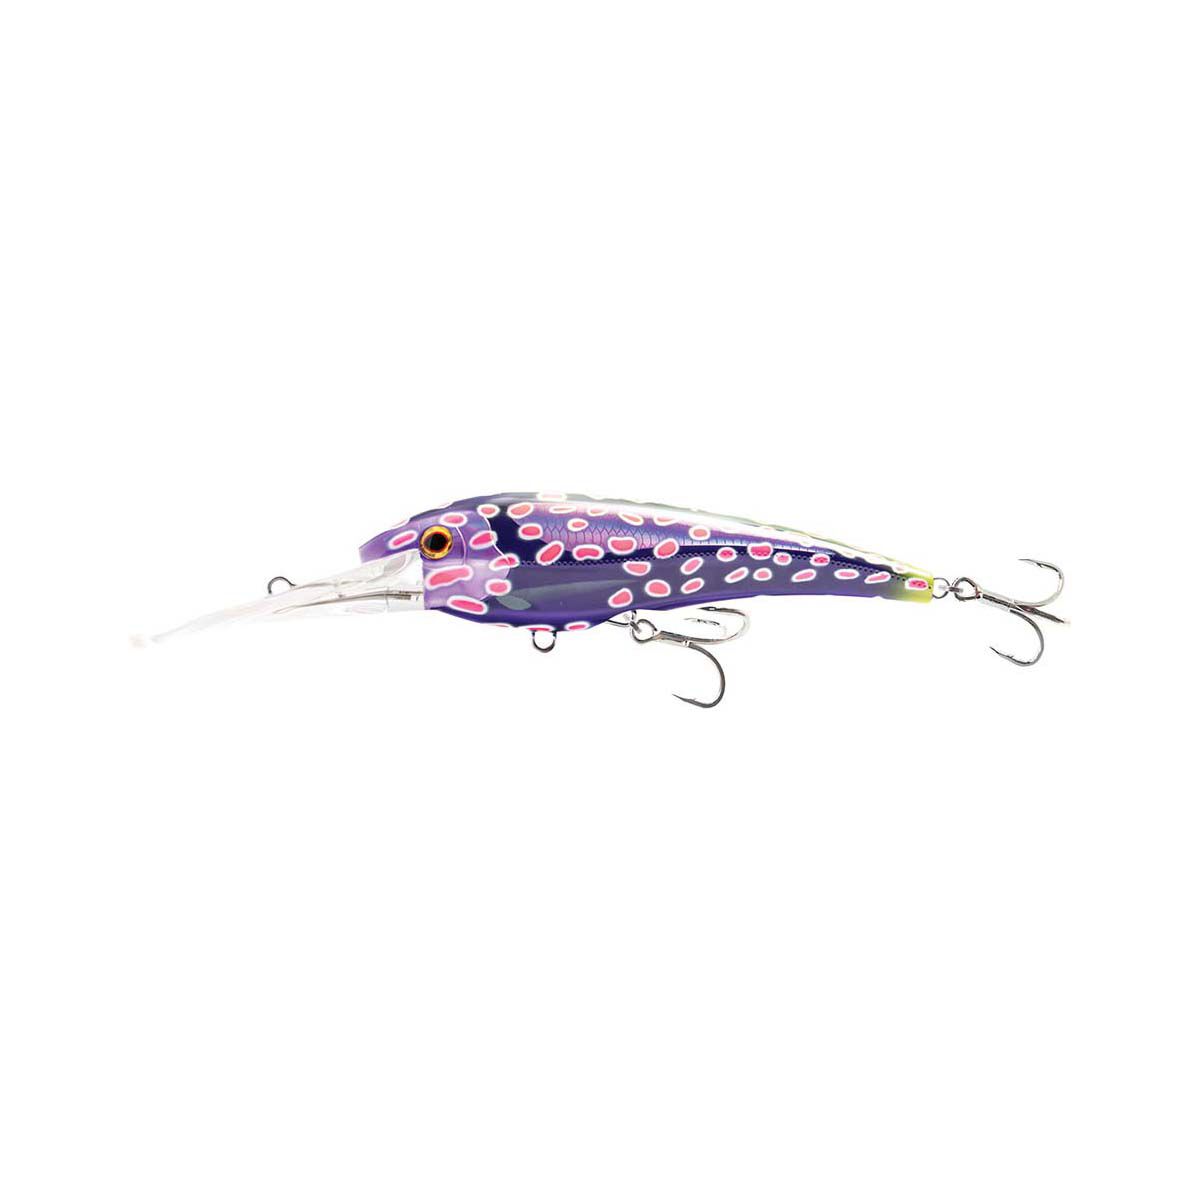 Nomad DTX Minnow Floating Hard Body Lure 140mm Nuclear Coral Trout